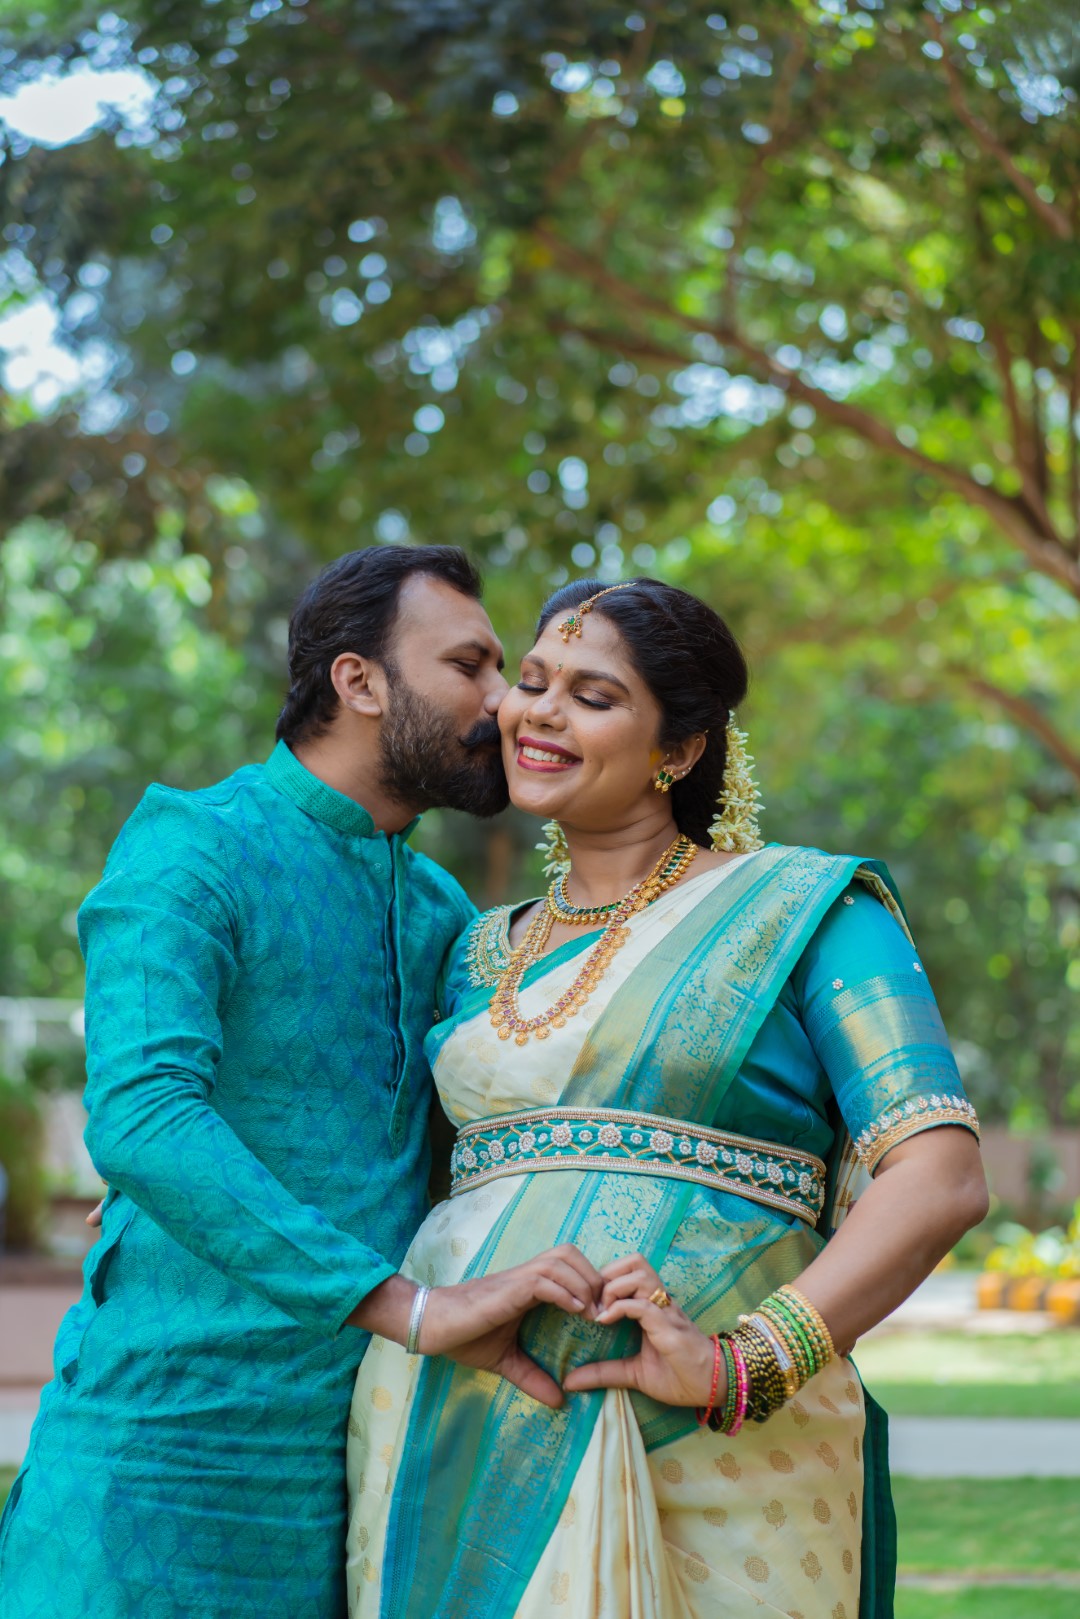 Maternity Photoshoot in Coimbatore: Capturing the Beauty of Pregnancy